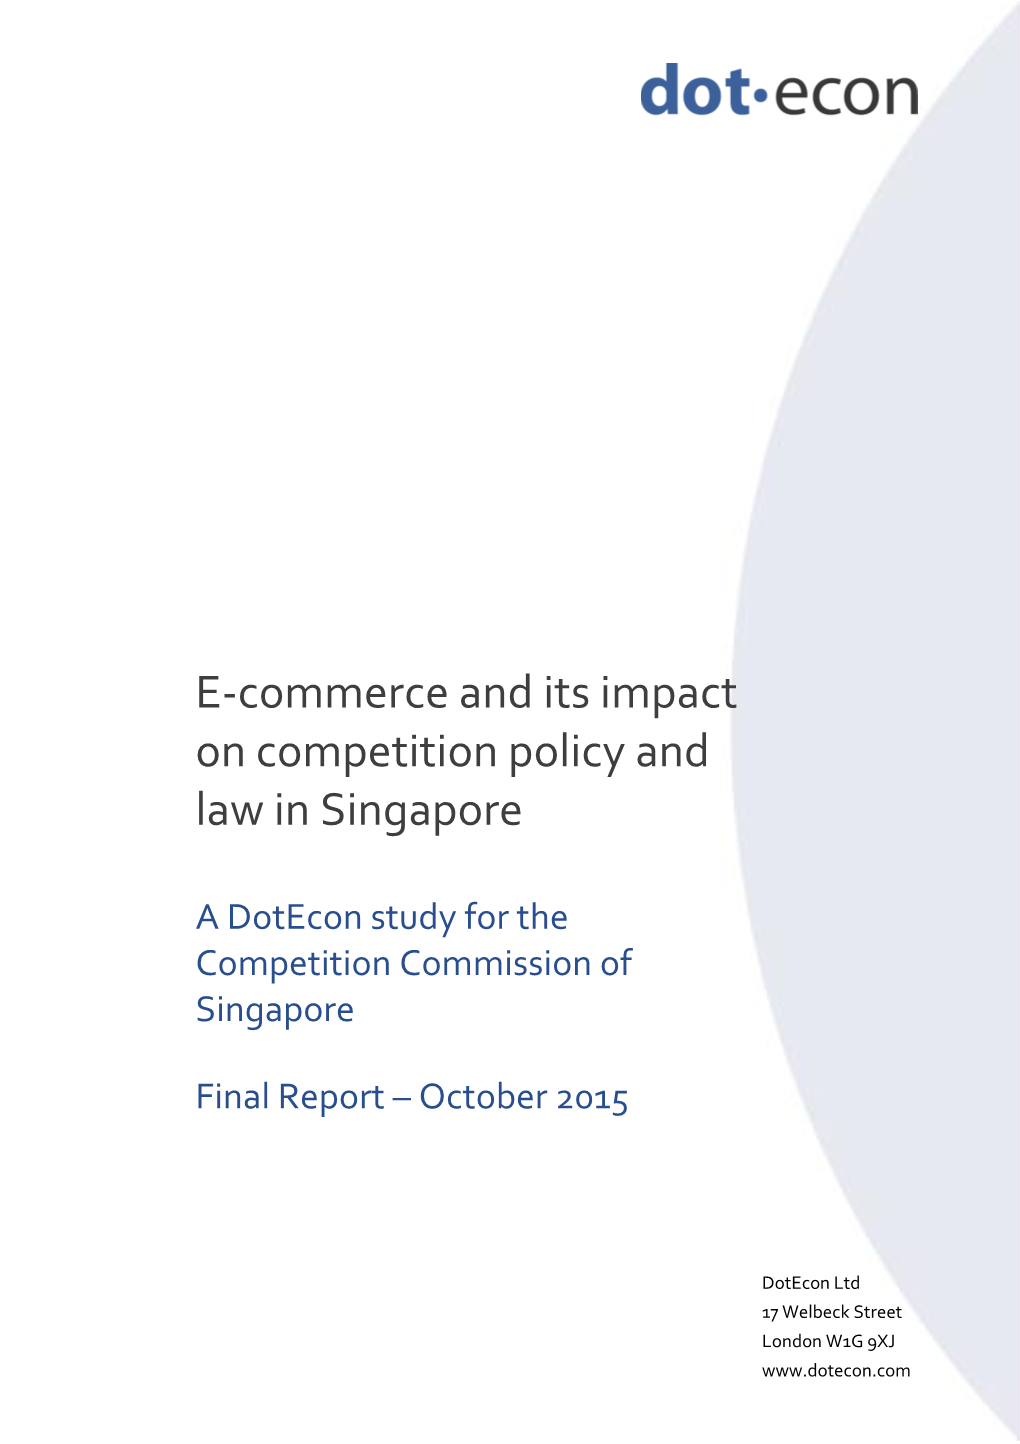 E-Commerce and Its Impact on Competition Policy and Law in Singapore